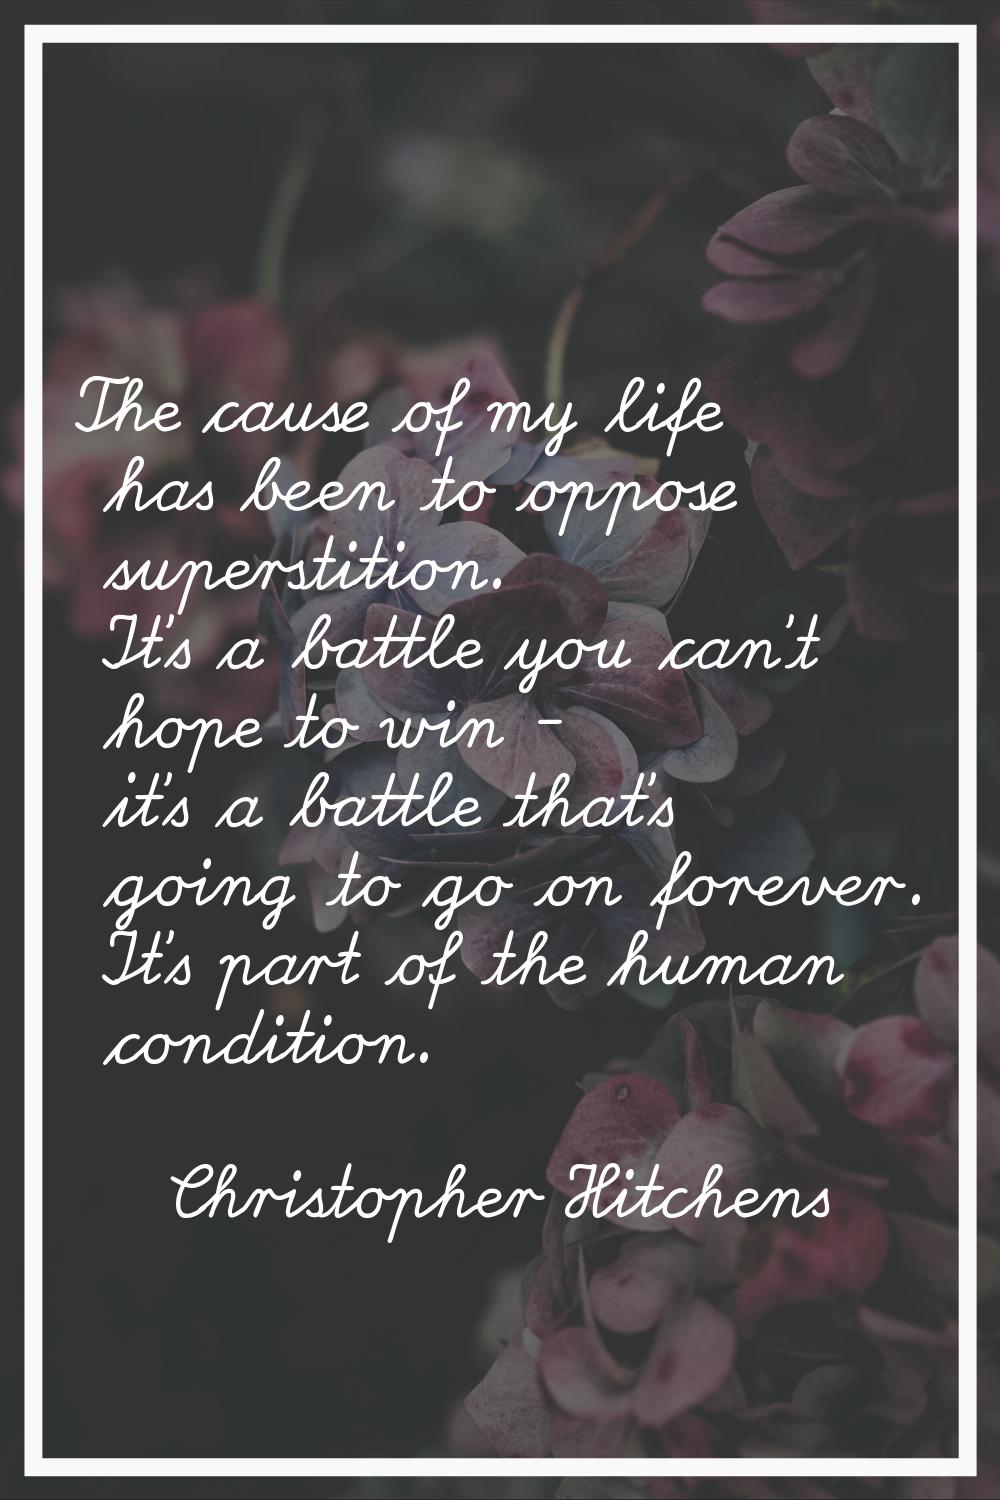 The cause of my life has been to oppose superstition. It's a battle you can't hope to win - it's a 